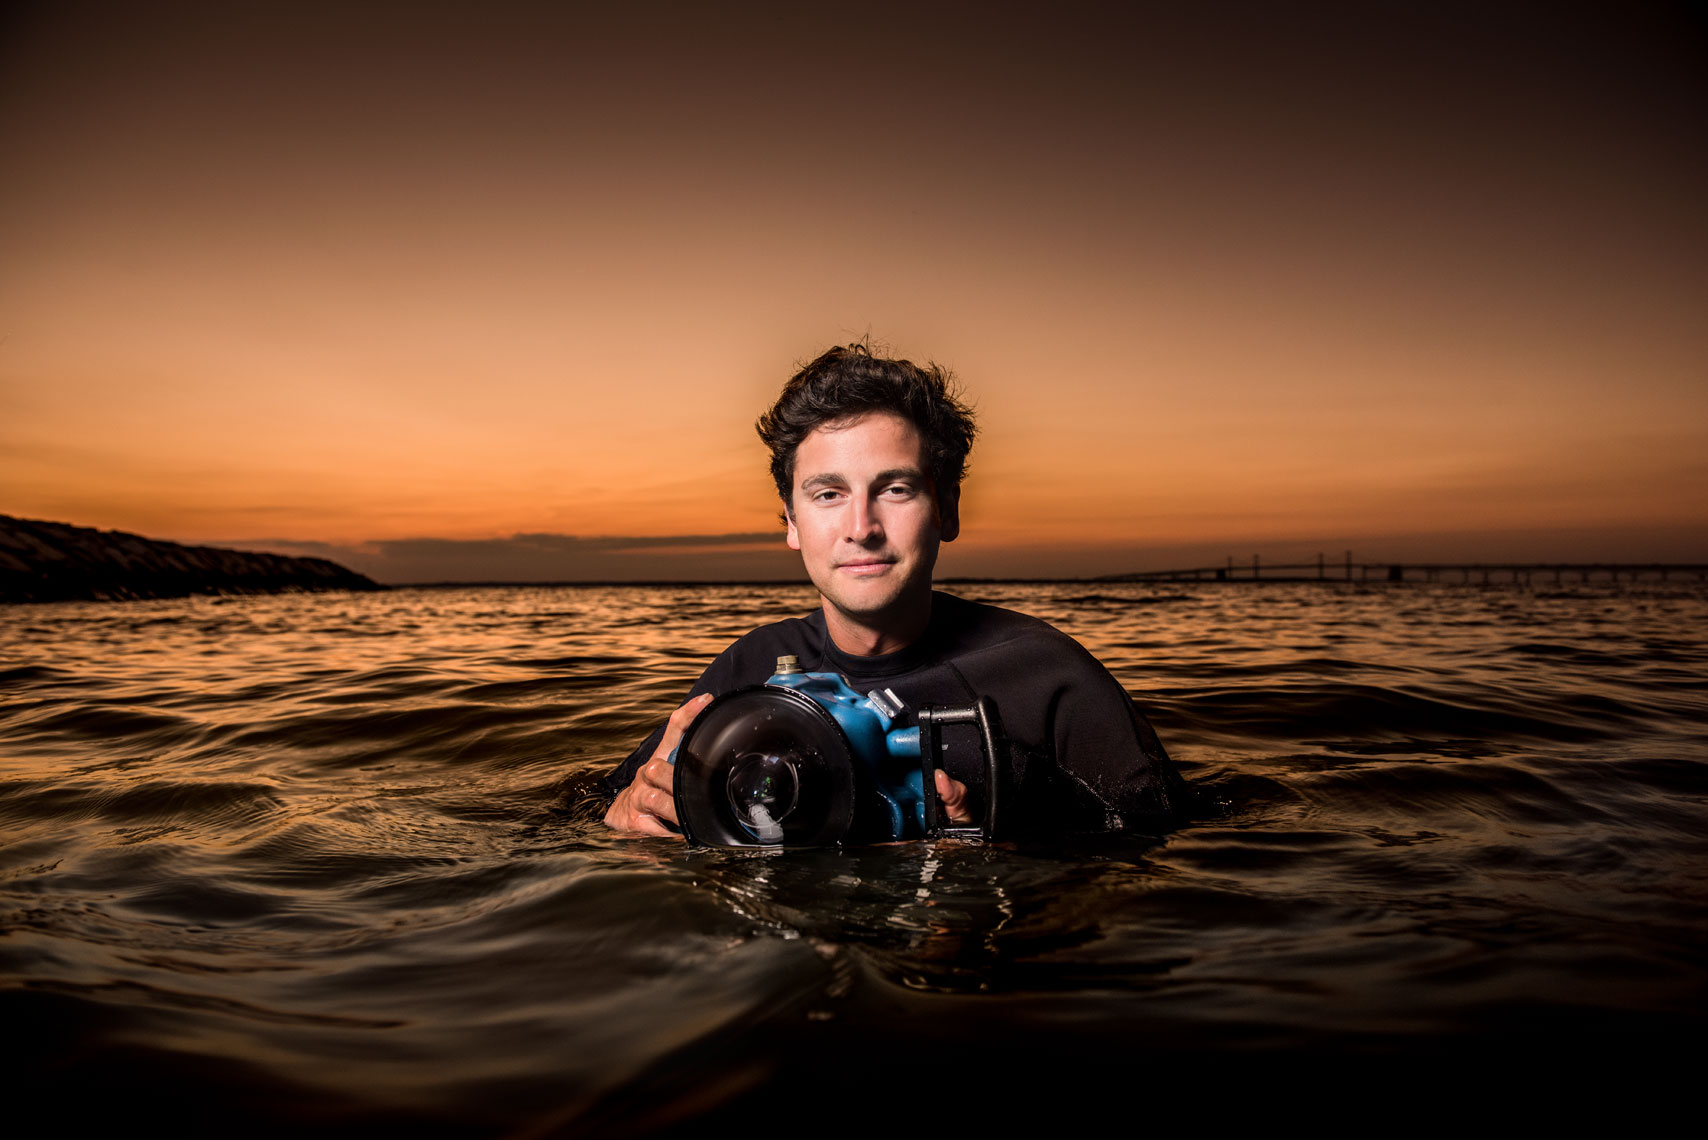 Jay P. Fleming holding an underwater camera while submerged in the Chesapeake Bay at sunset